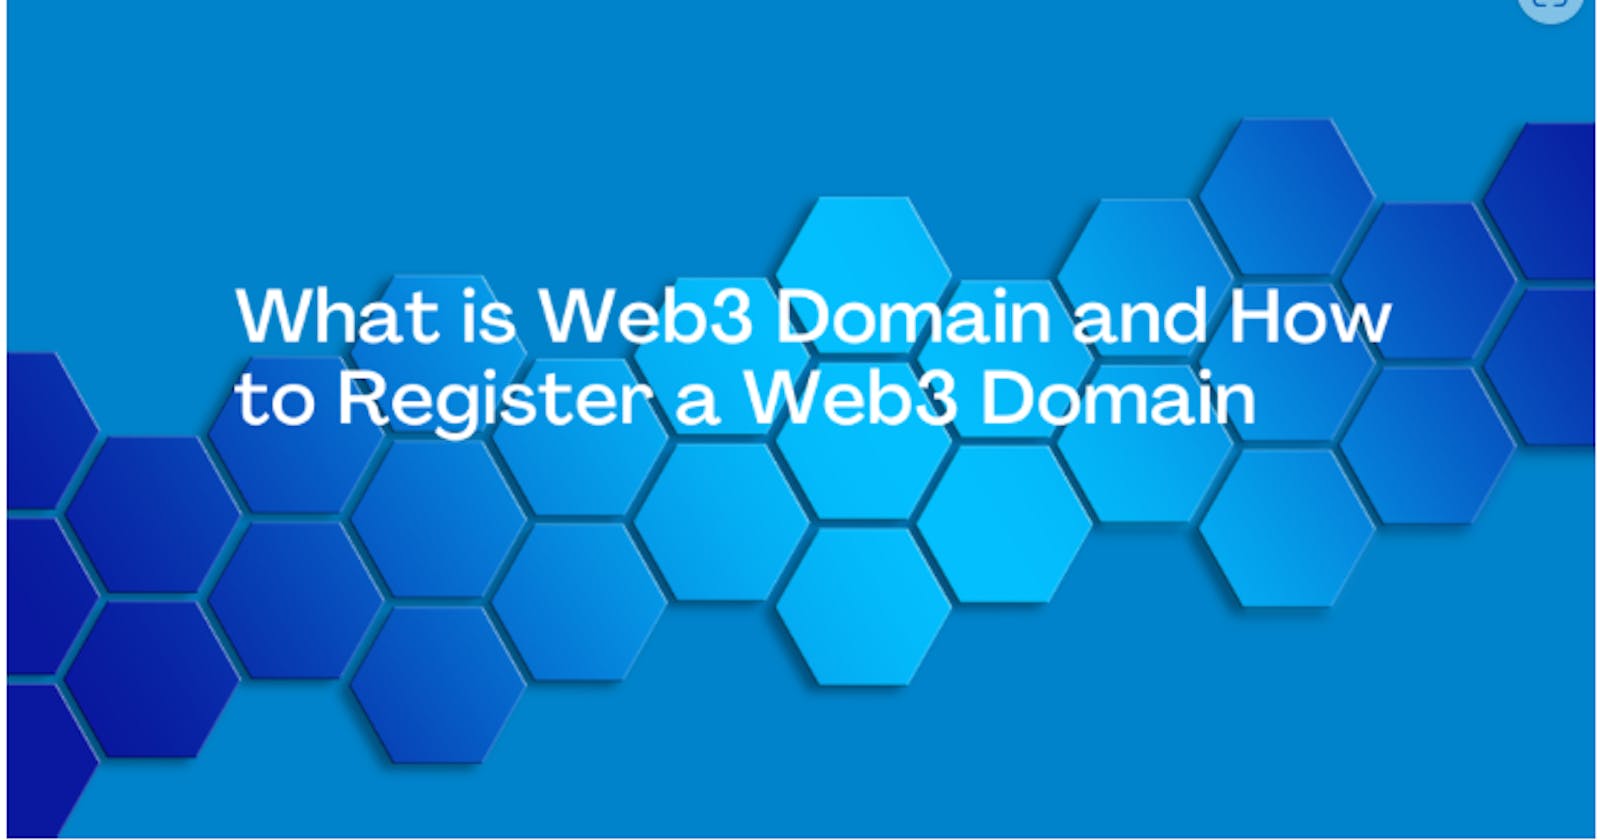 How To Register A Web3 Domain